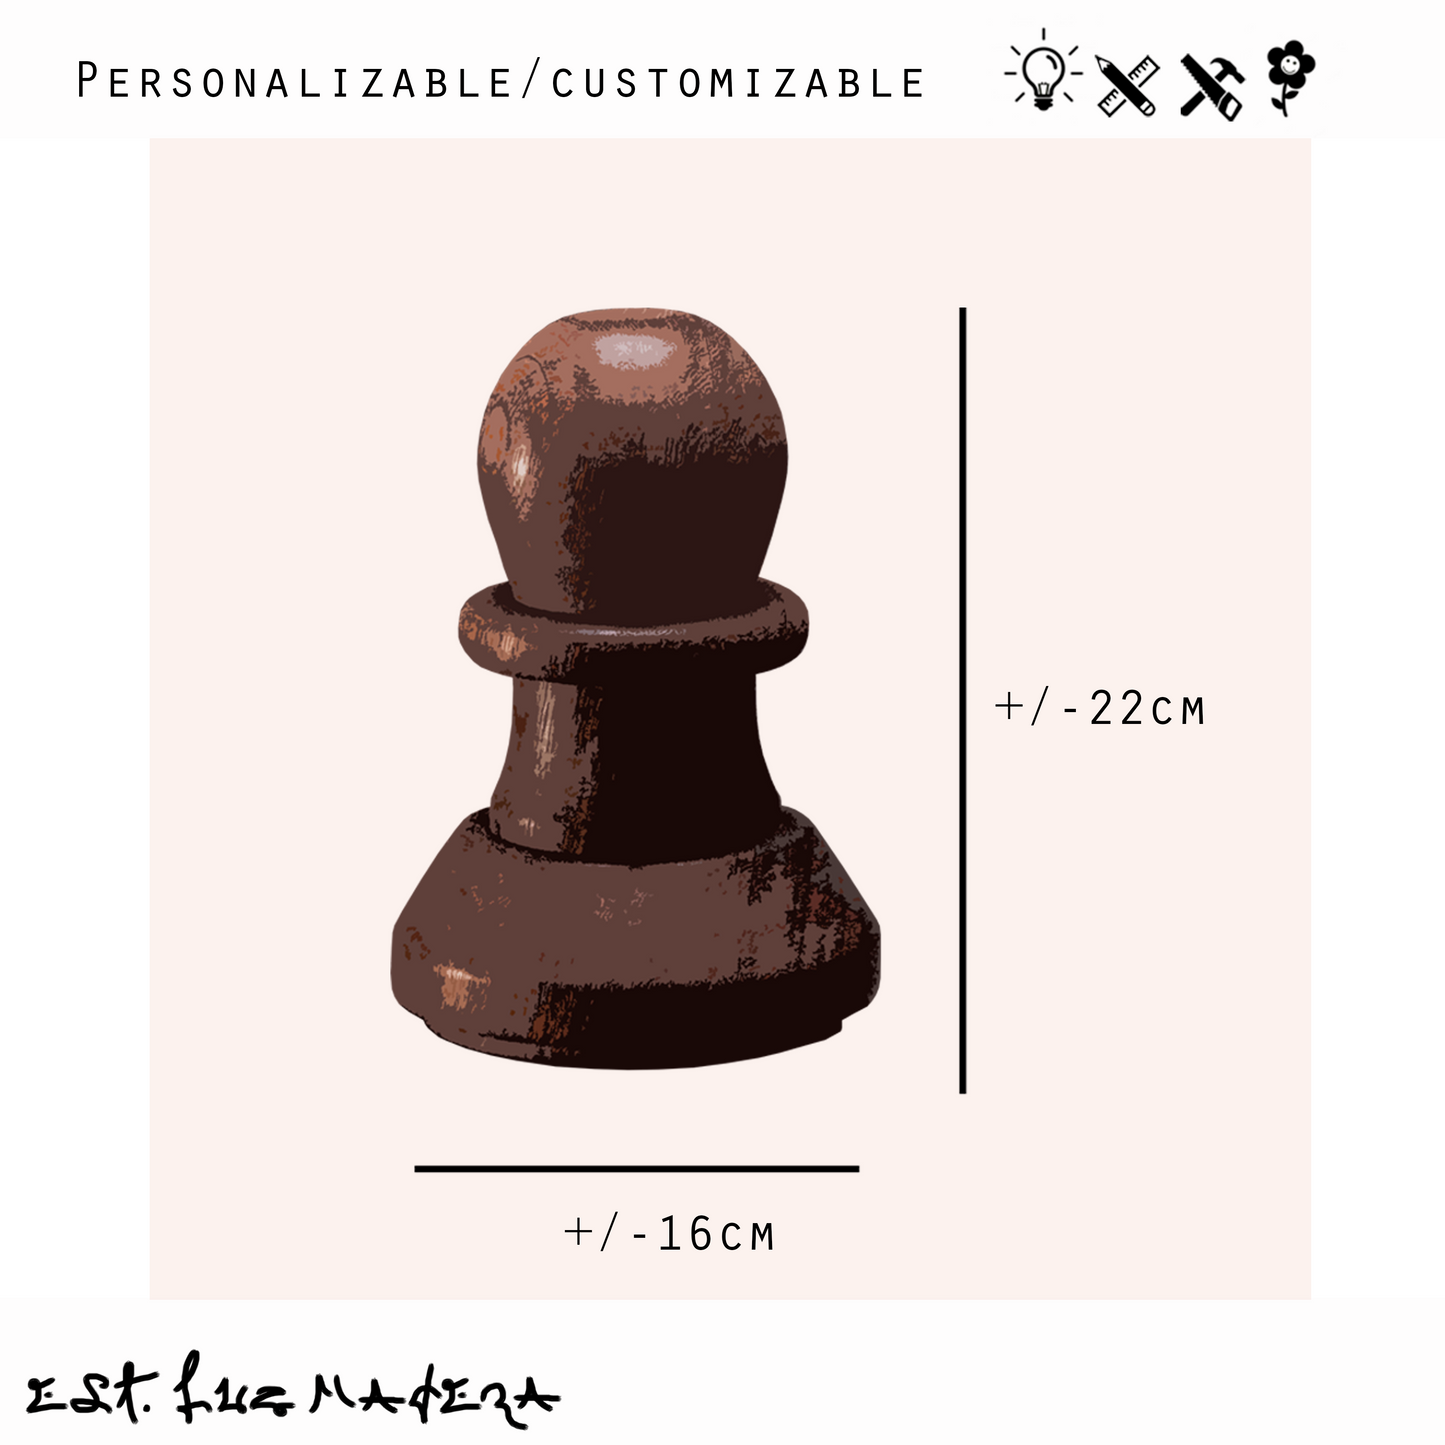 Wooden Decorative Chess Piece: Pawn